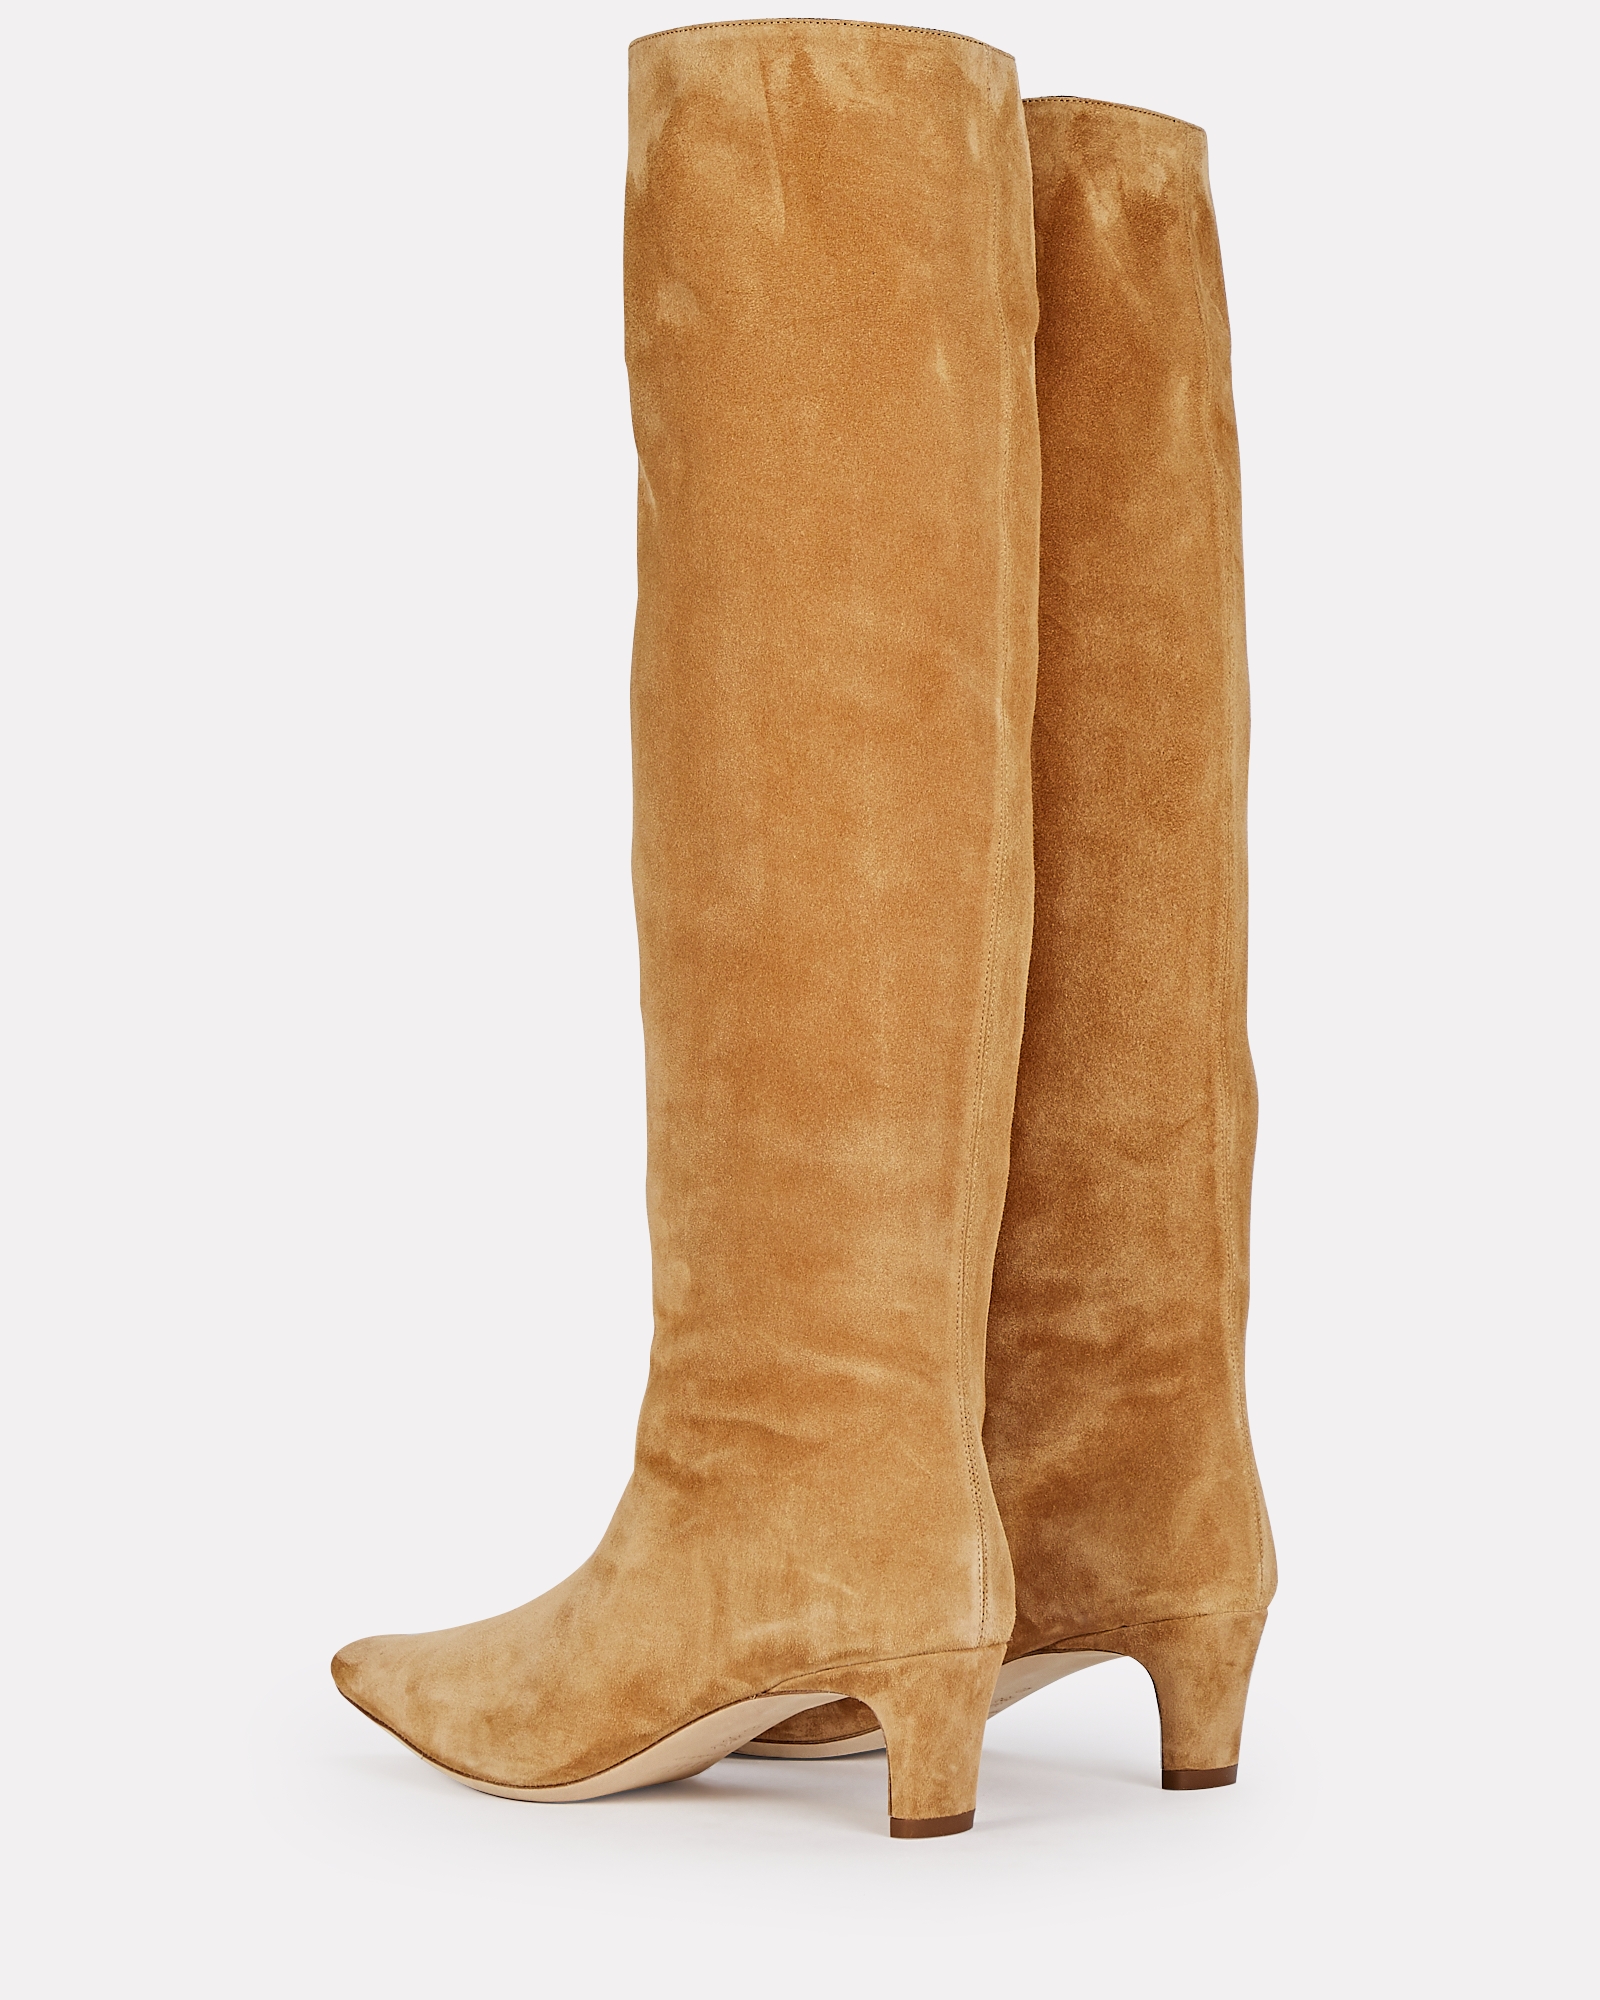 STAUD Wally Suede Knee-High Boots | INTERMIX®